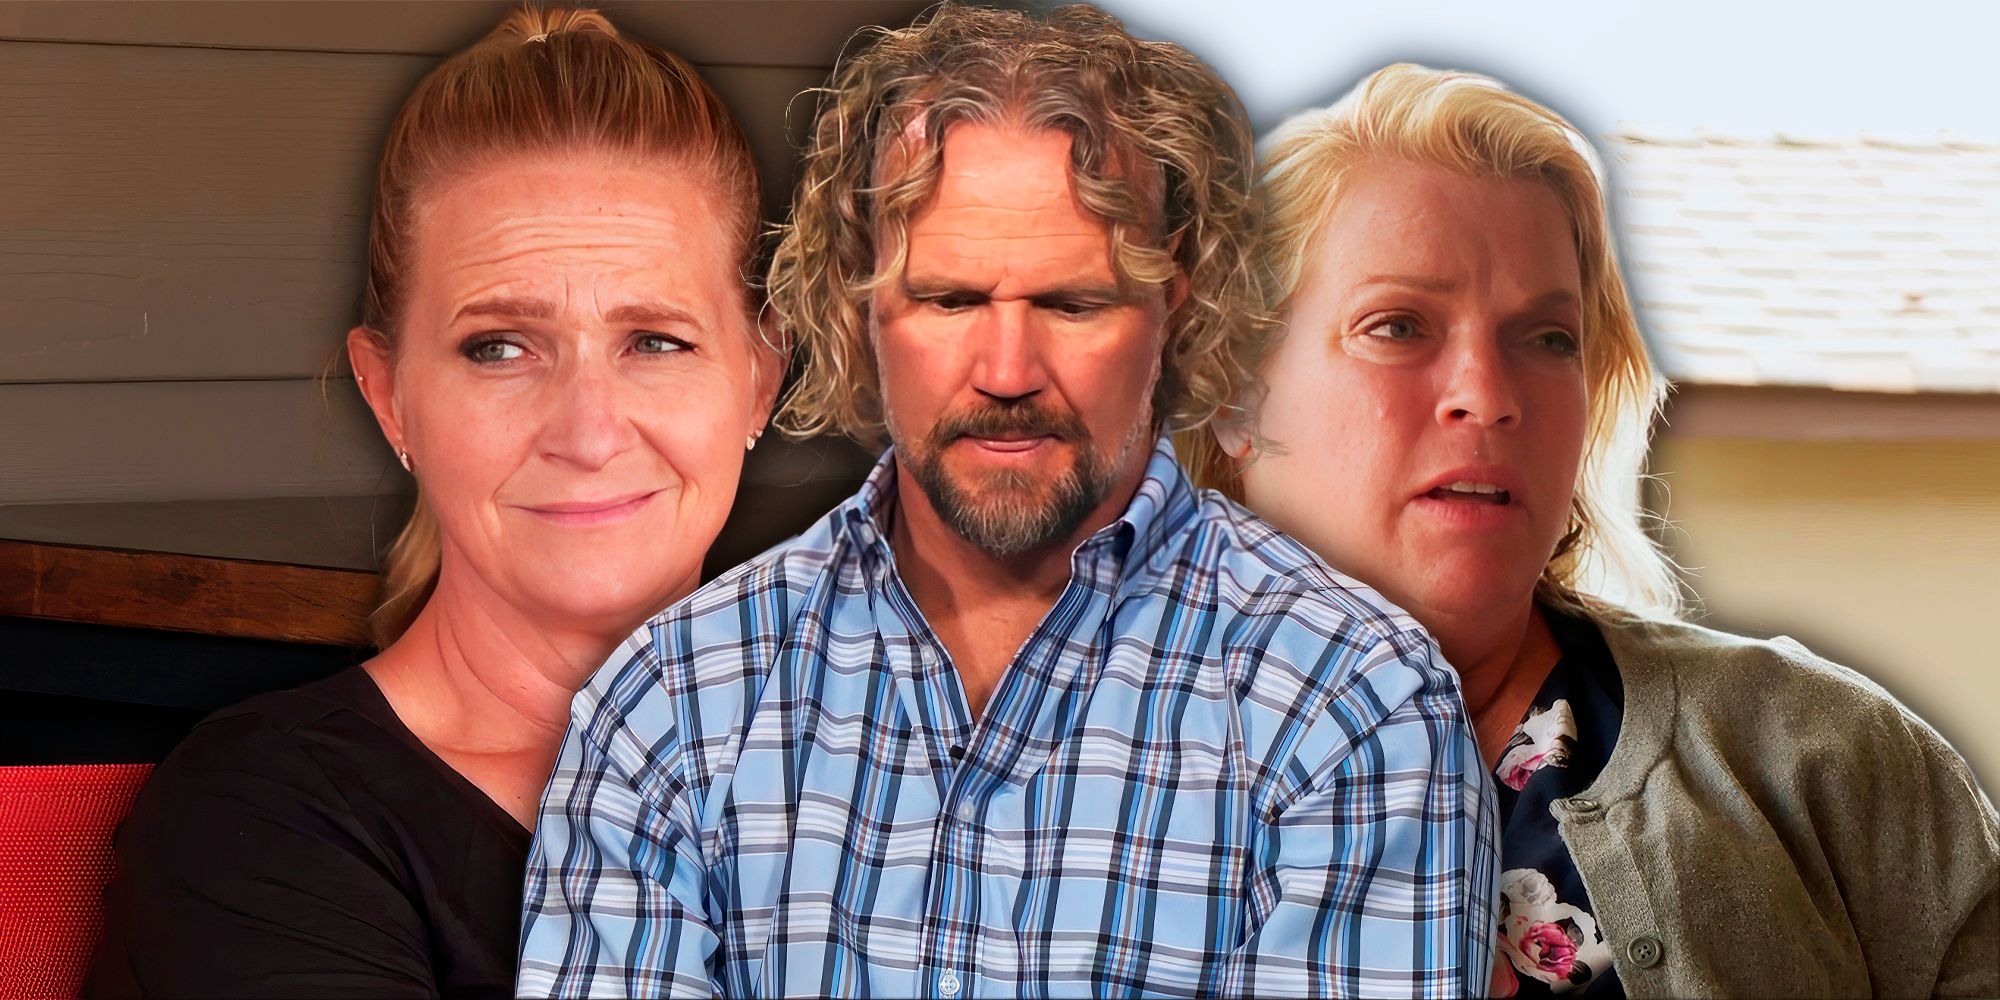 Sister Wives' Christine Brown Confirms Real Reason She Left Kody Brown